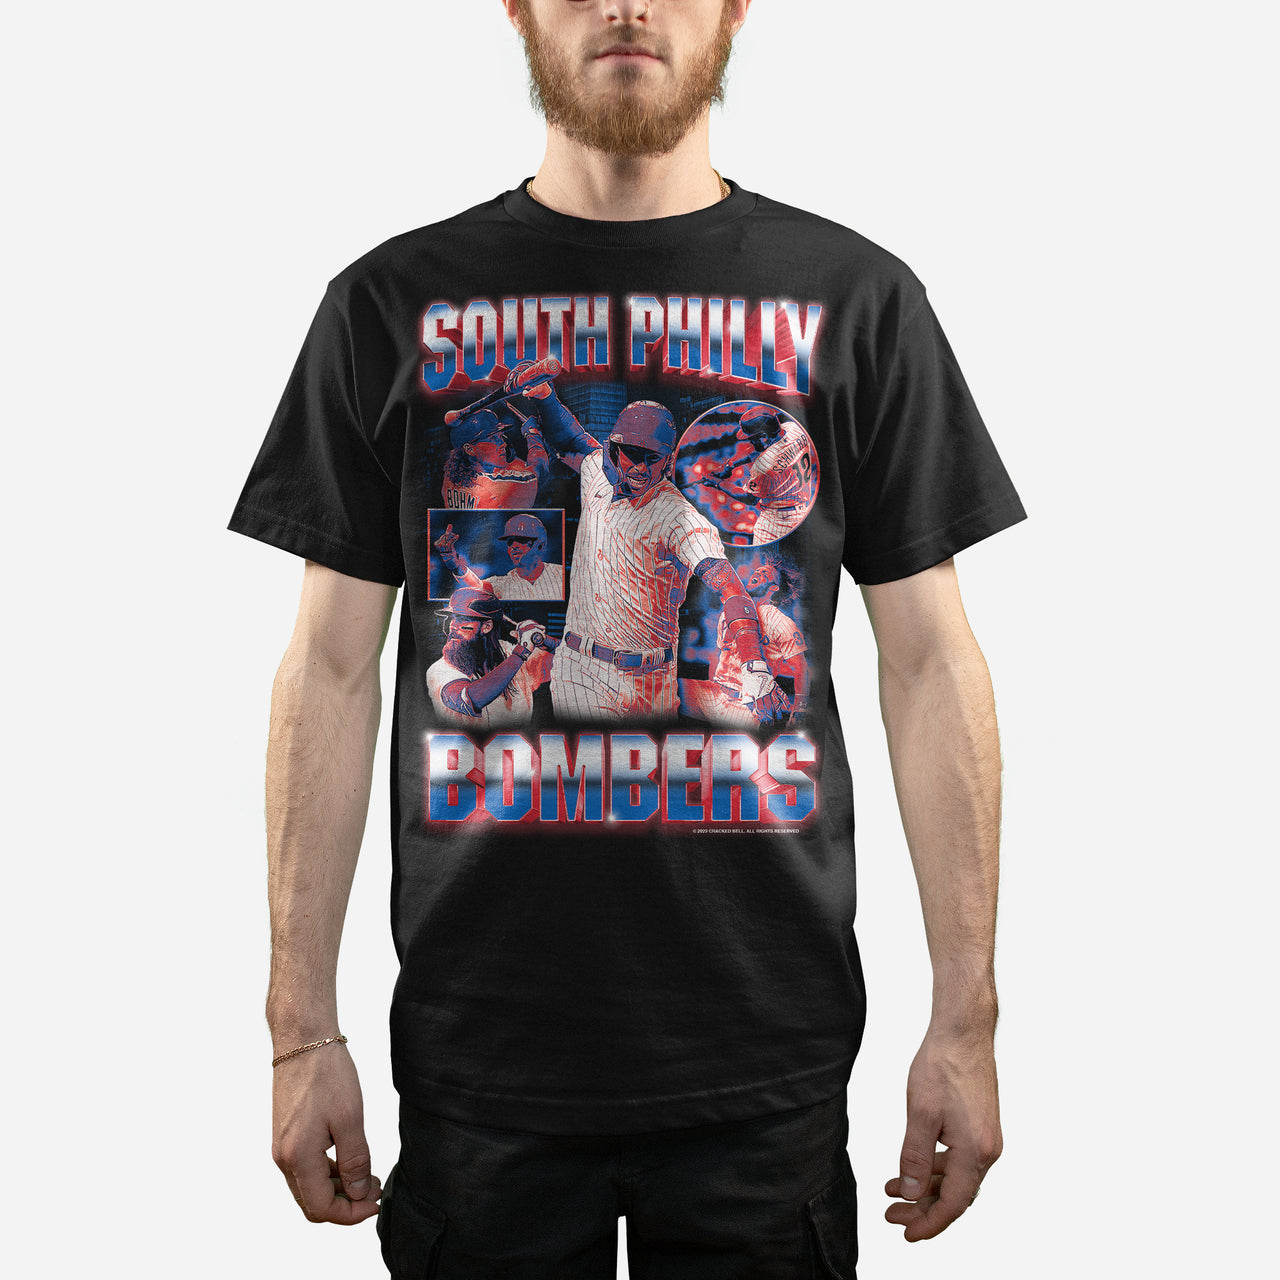 "South Philly Bombers" Shirt